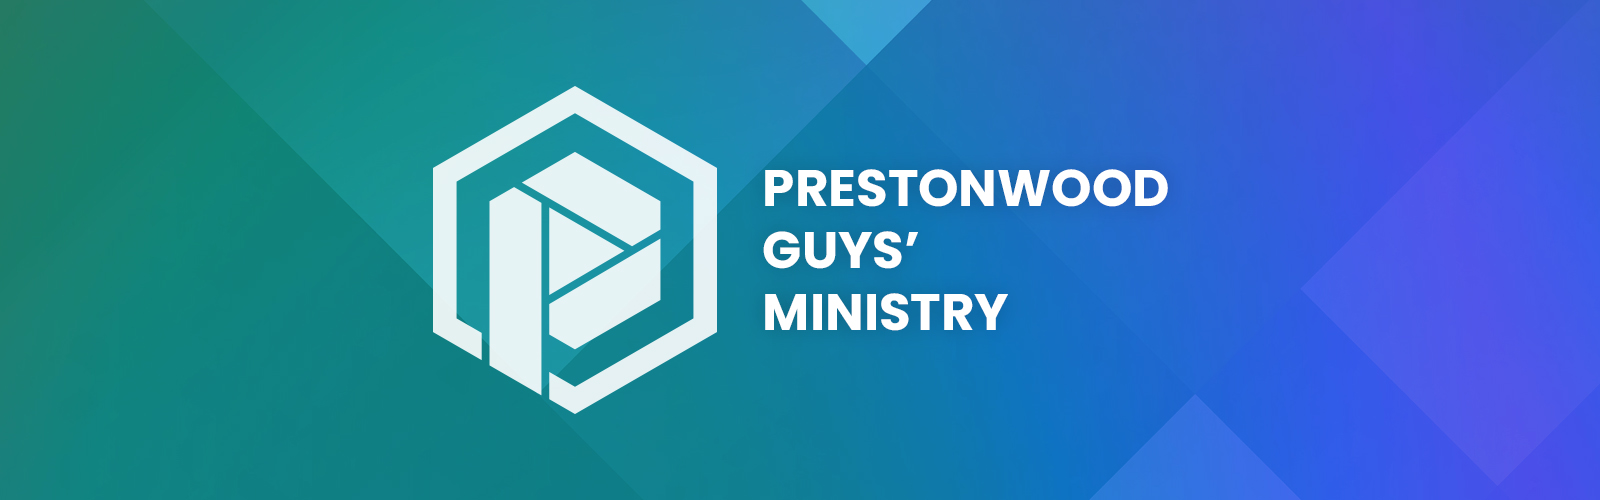 Guys' Ministry